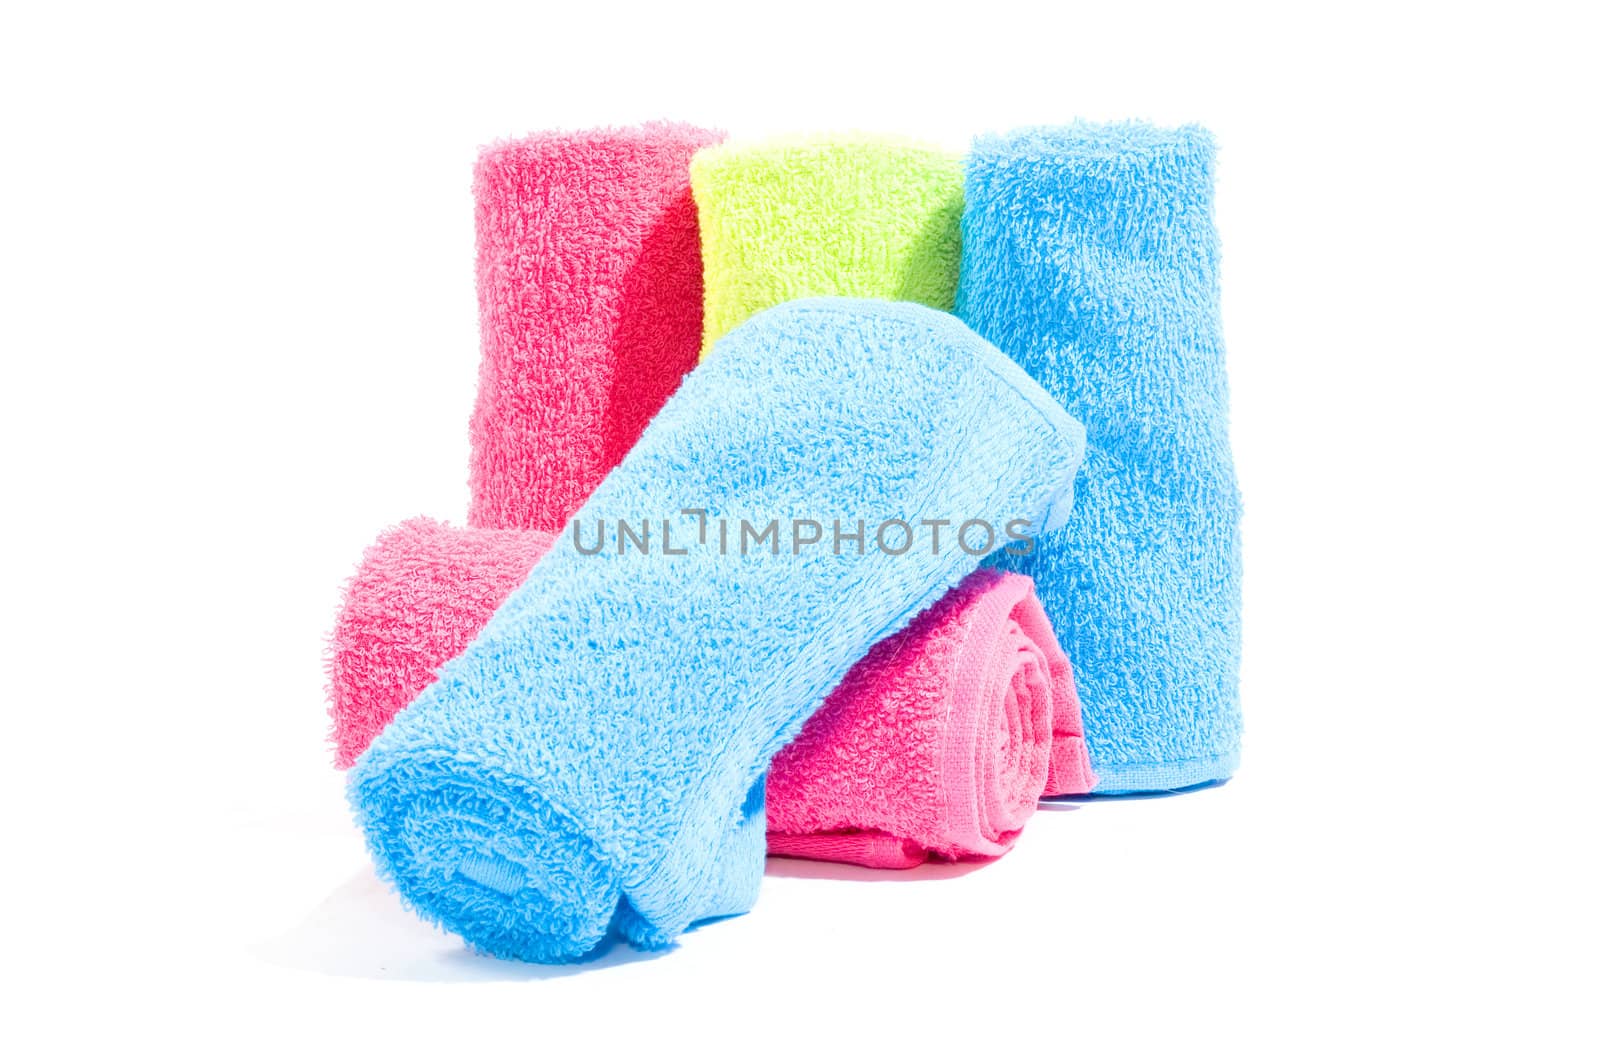 Colorful towel rolls on a white background 

